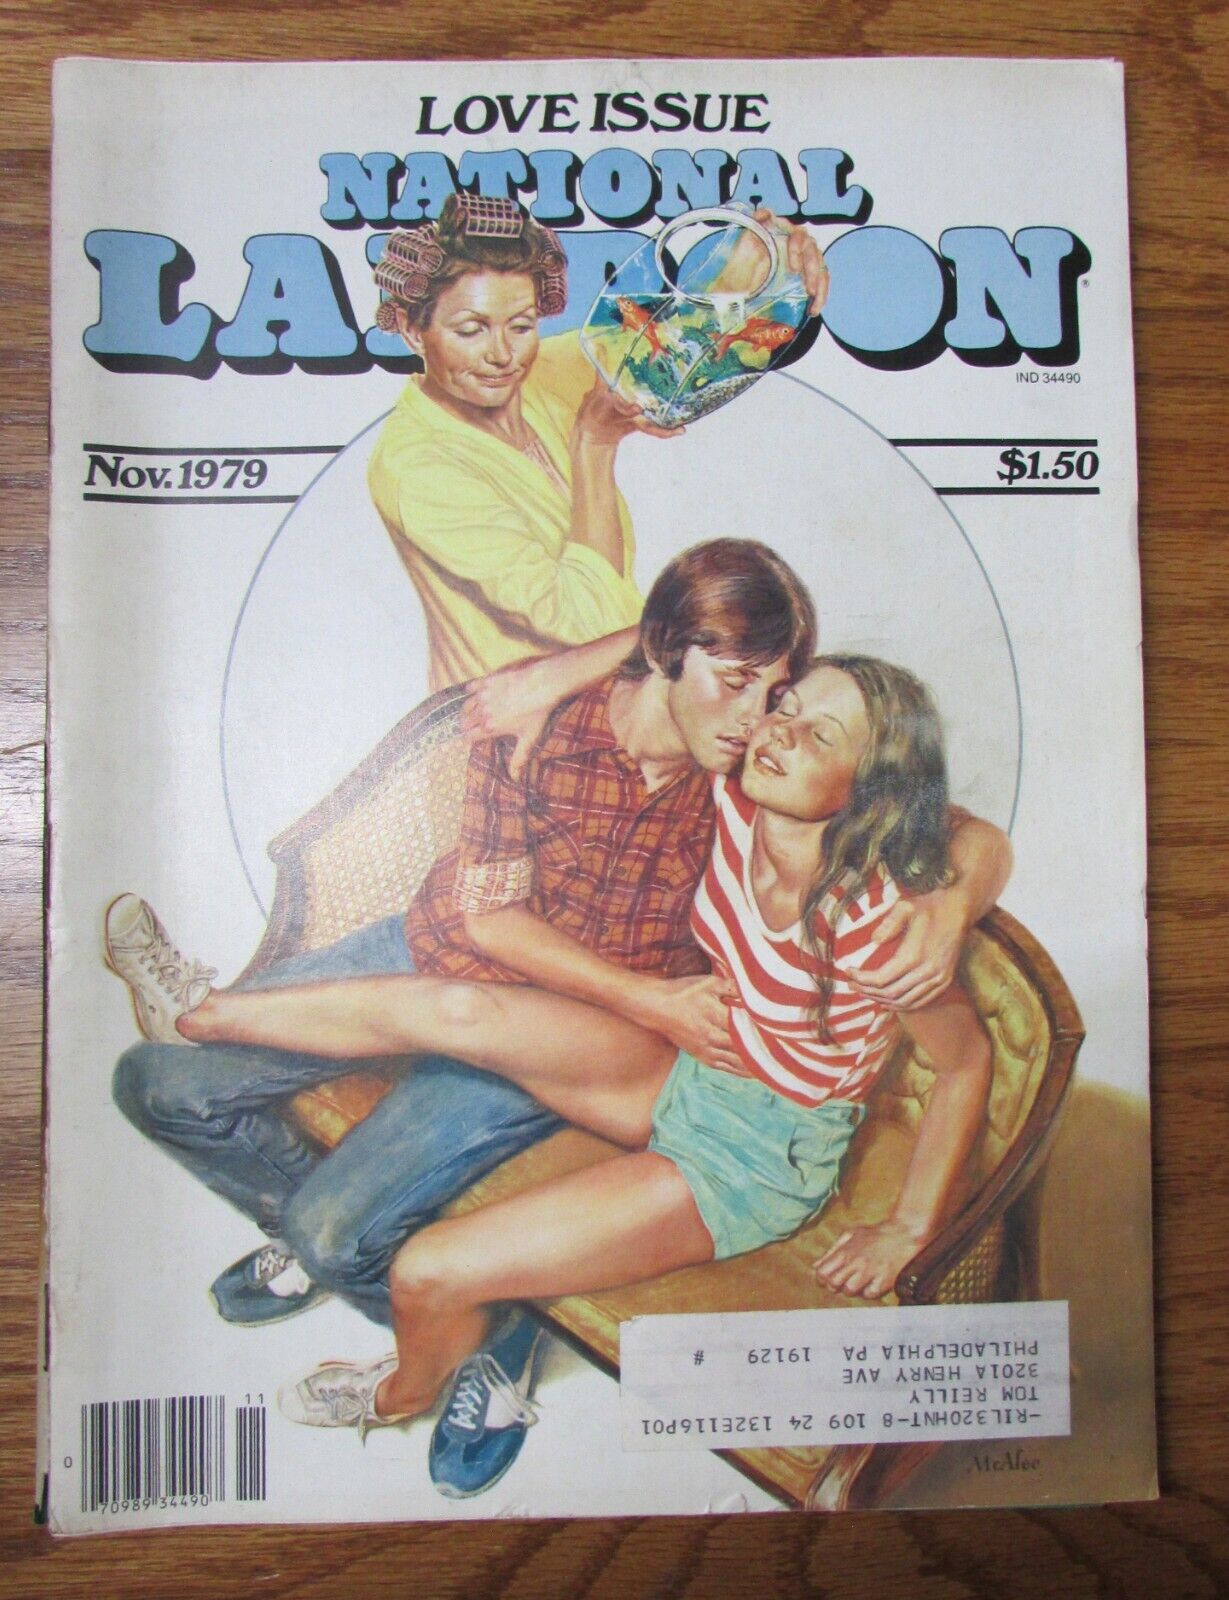 NATIONAL LAMPOON November 1979 Humor for Adults Magazine LOVE ISSUE